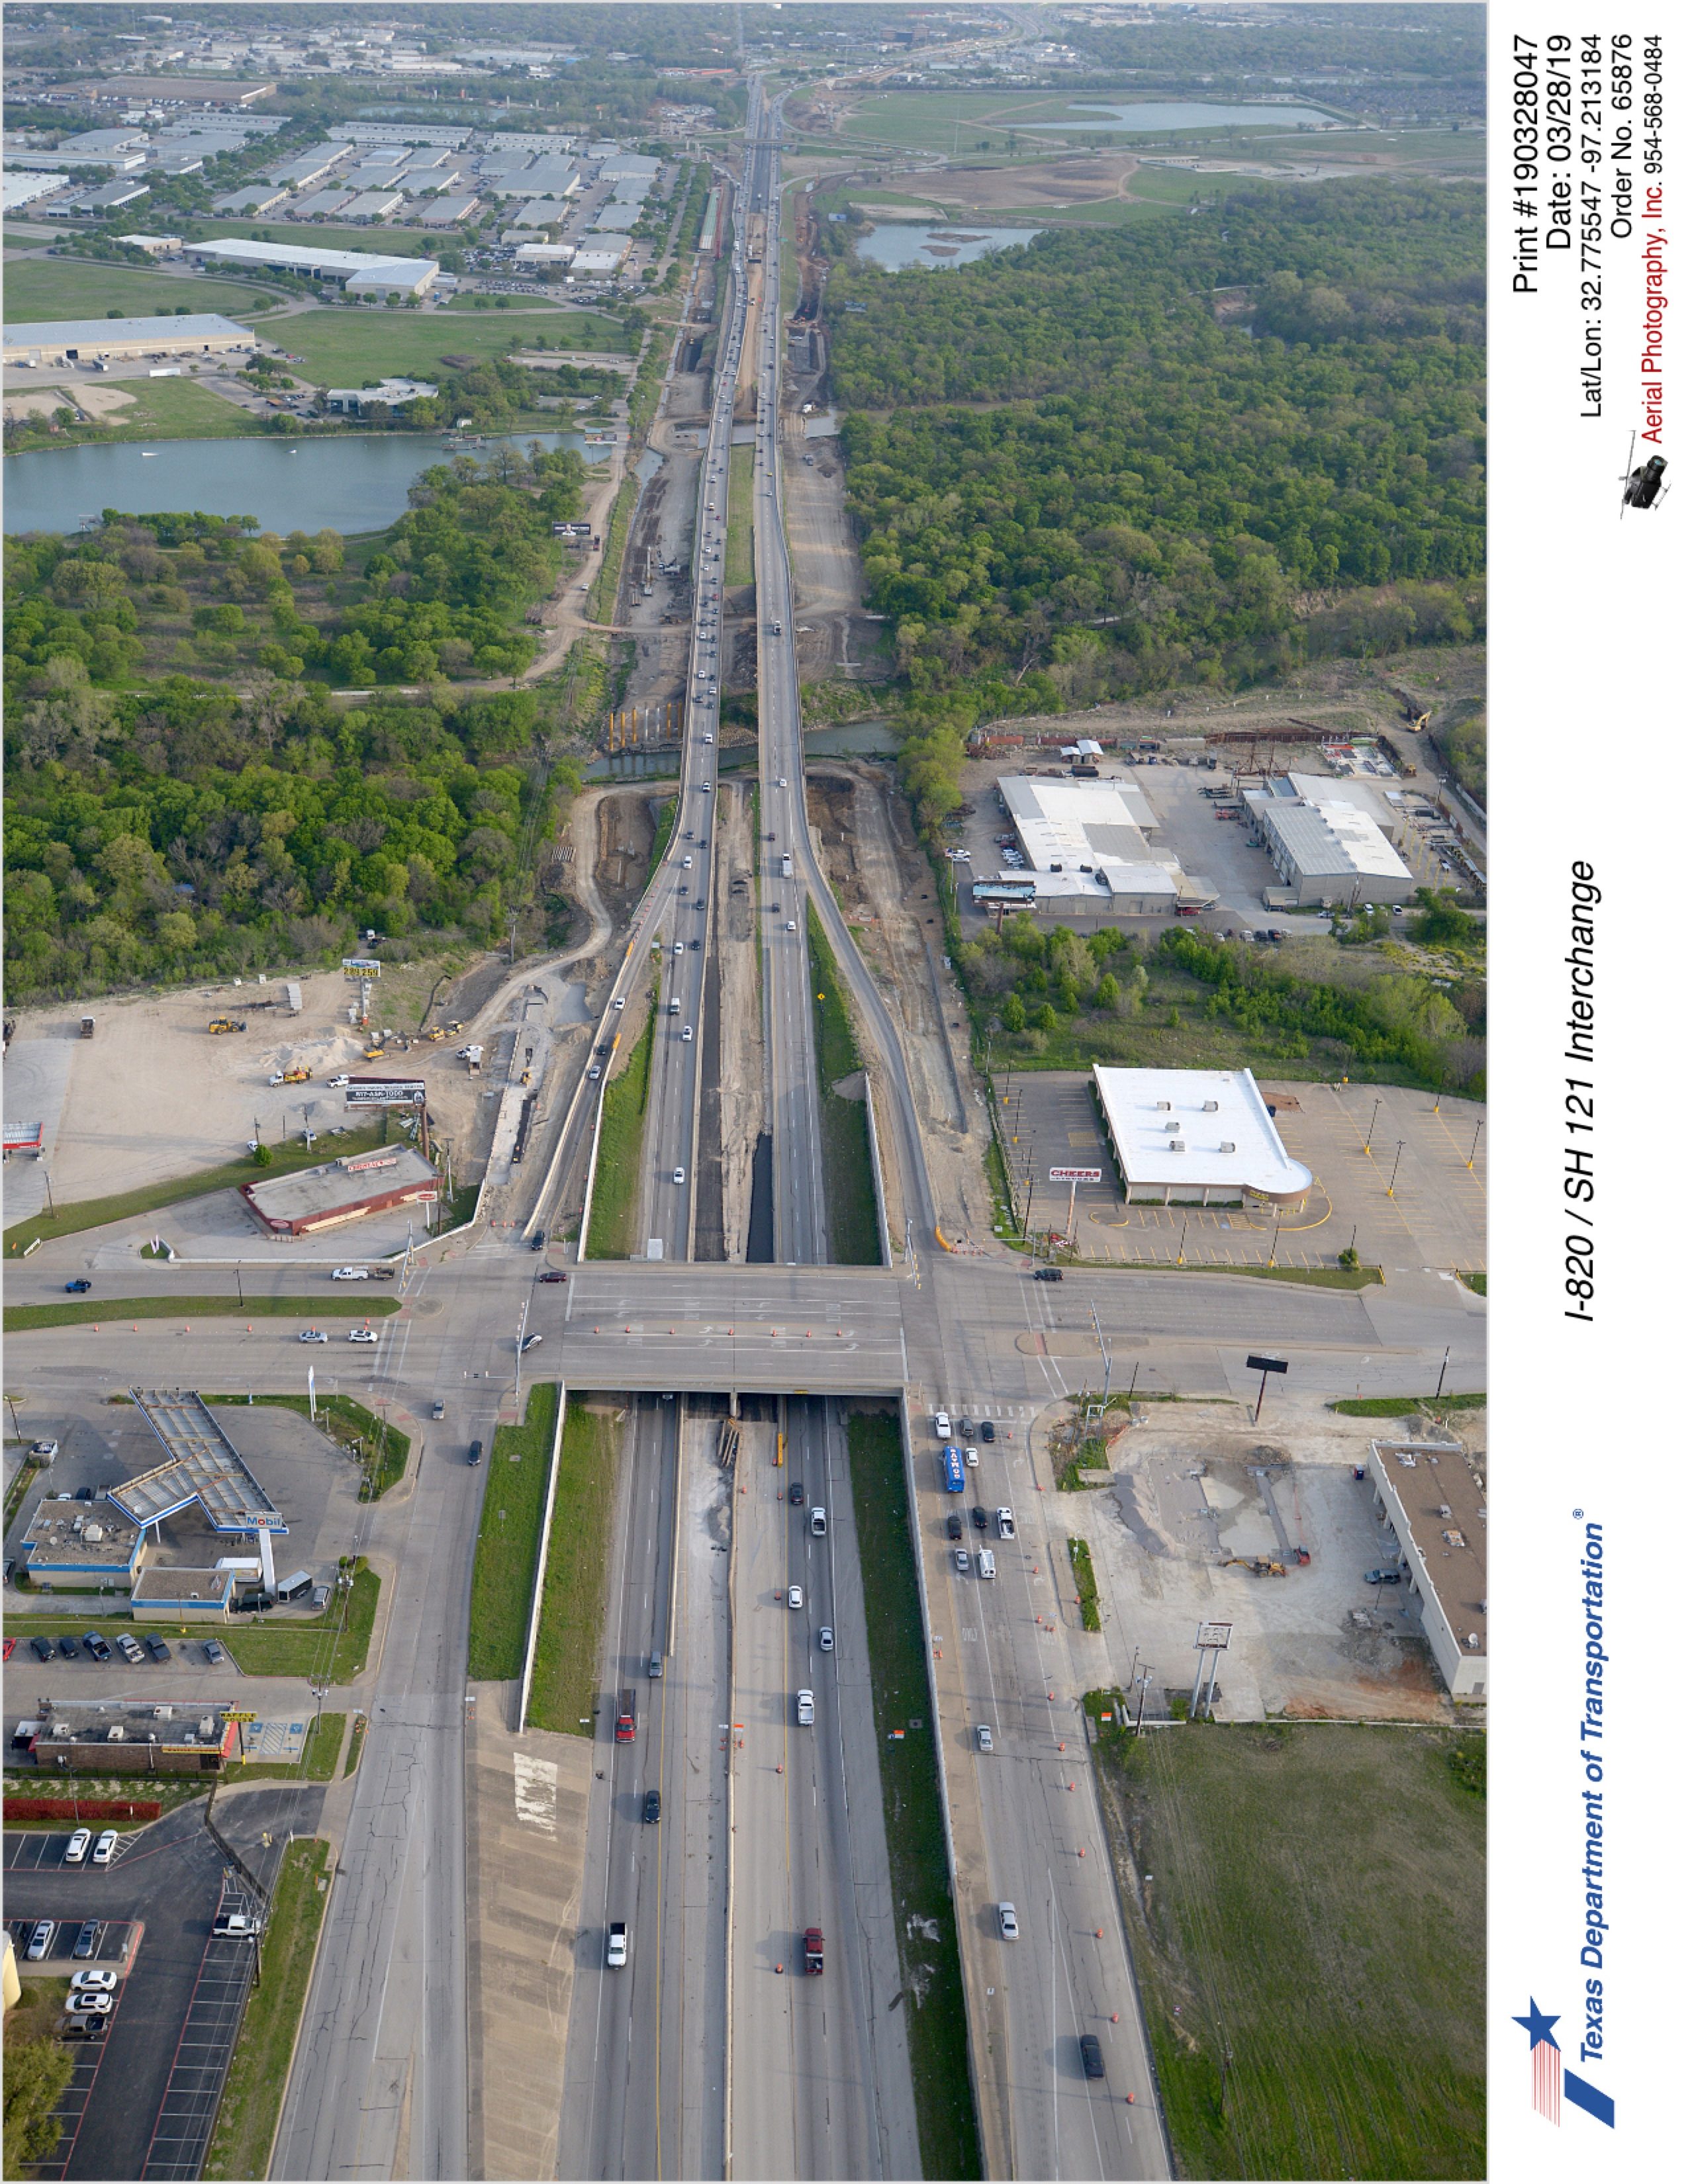 I-820 looking north with Randol Mill Road crossing in foreground.